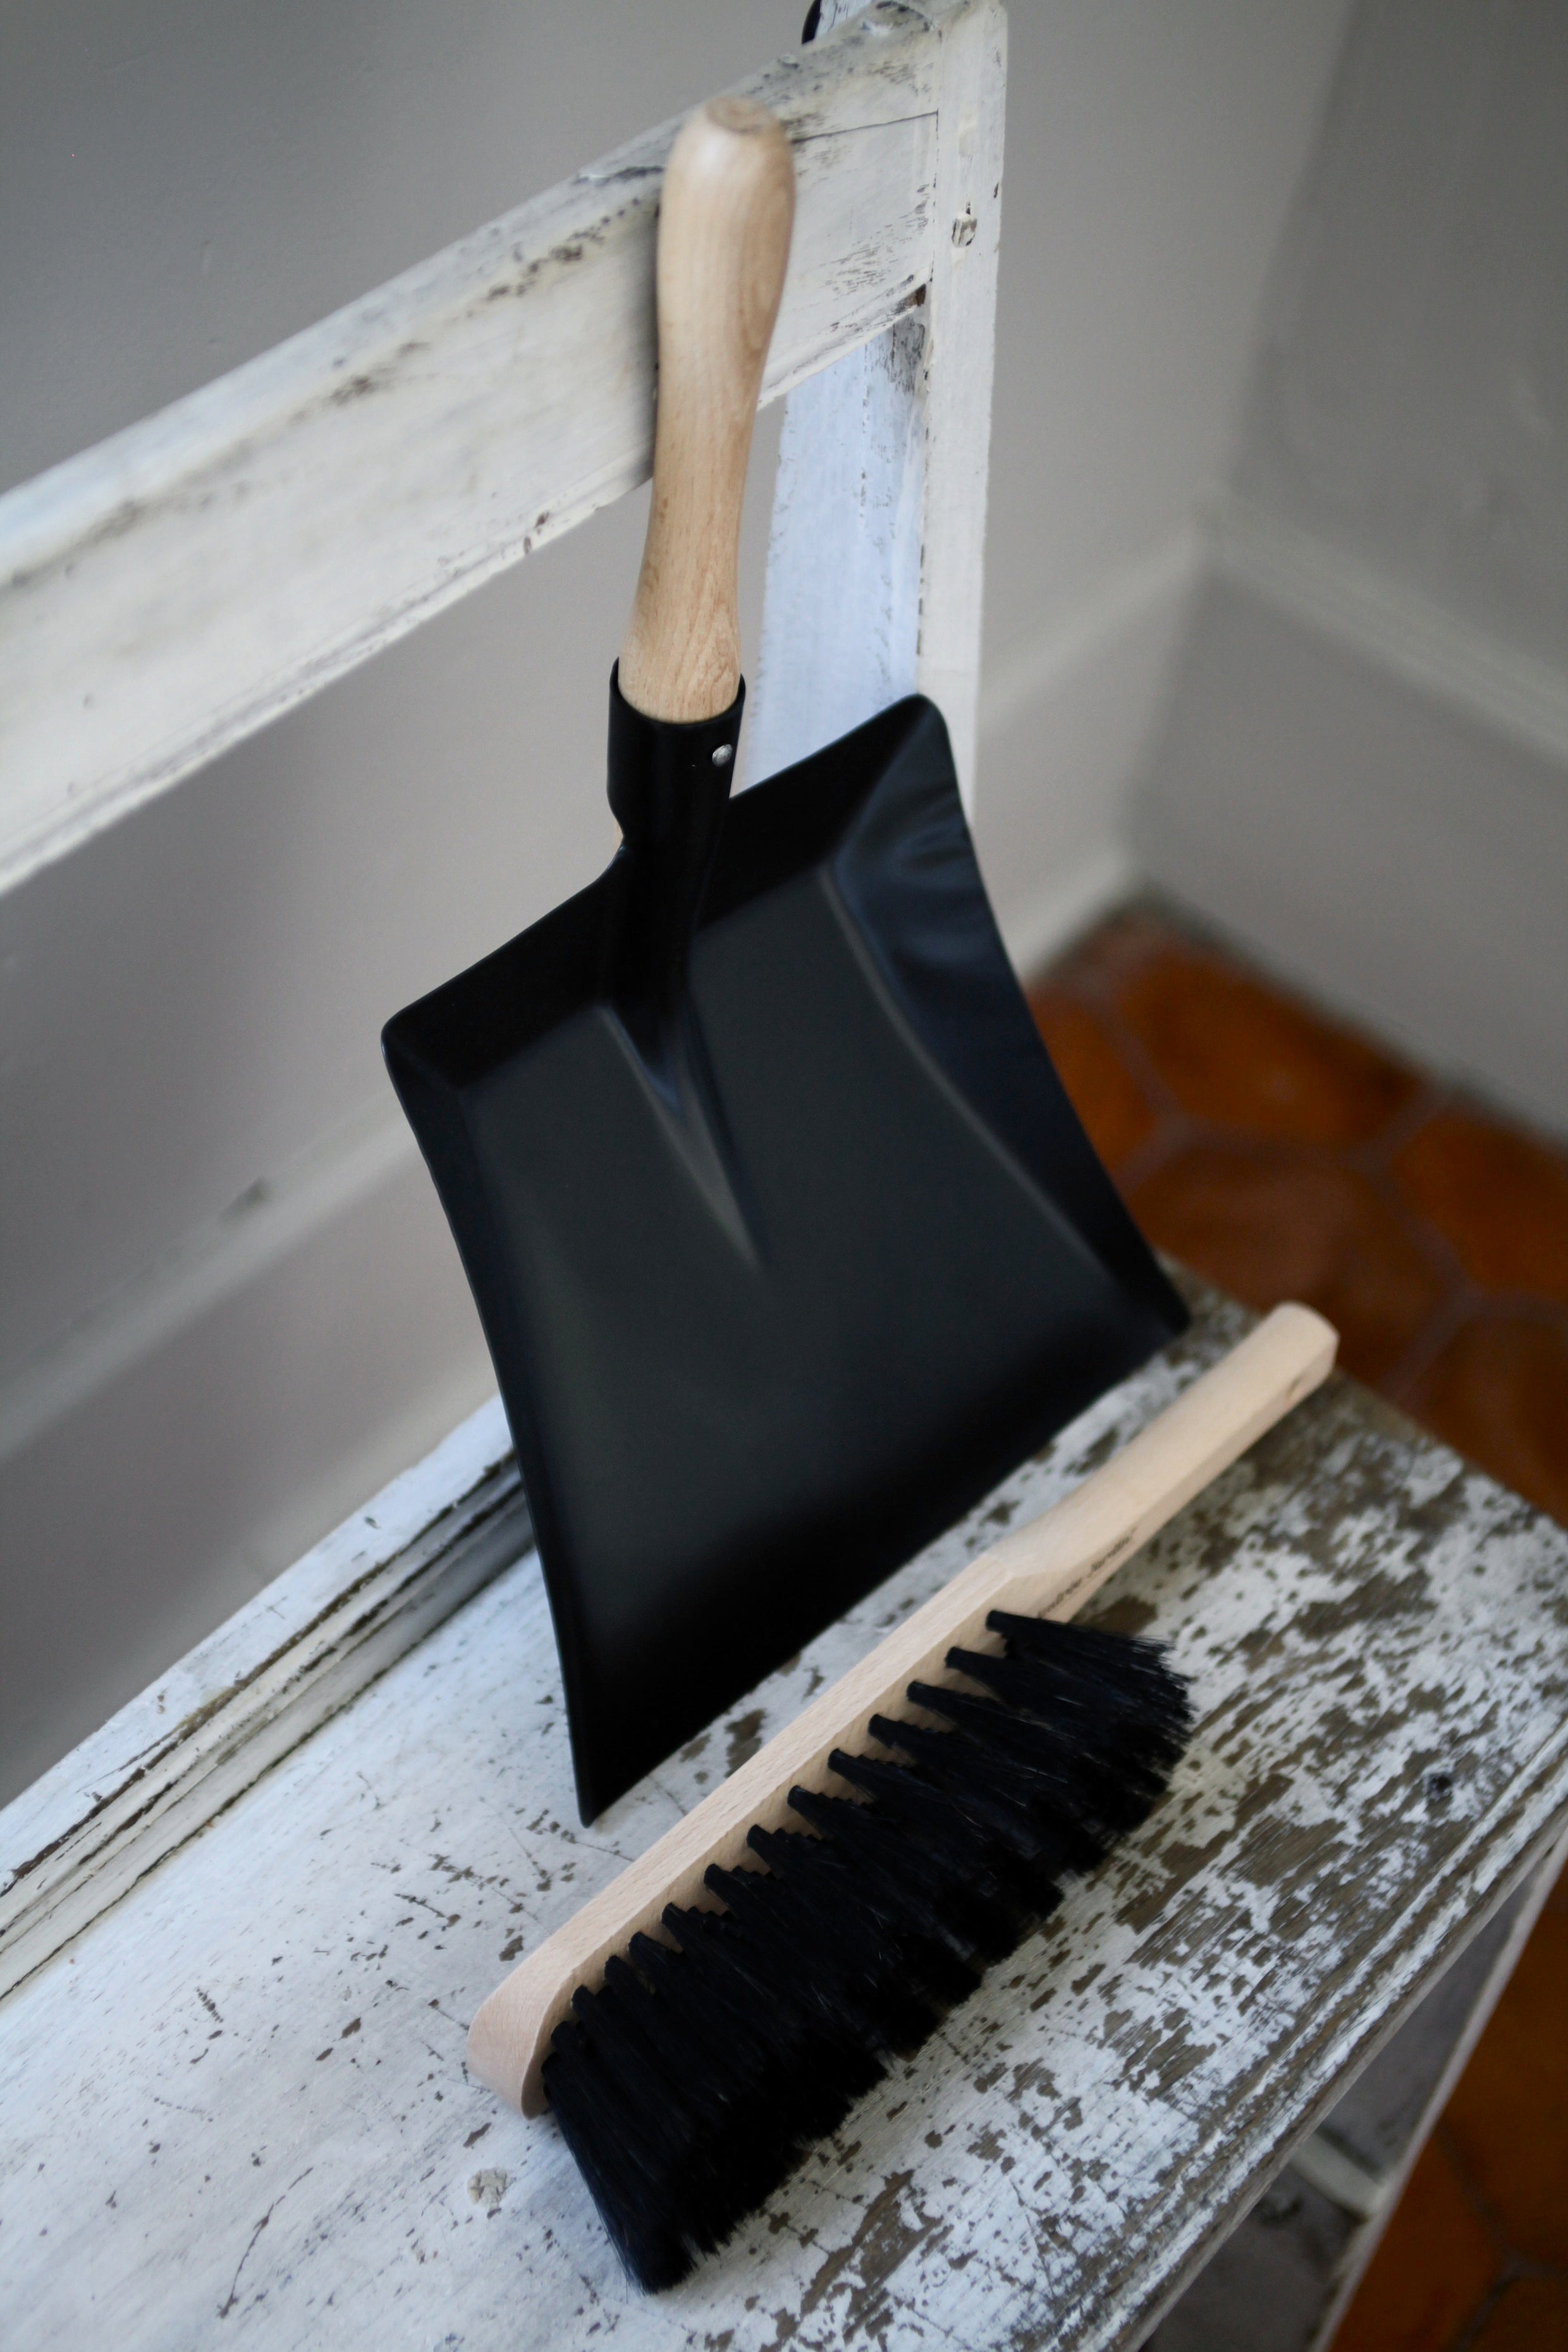 Andrée Jardin Tradition Black Sheet Metal Dustpan Utilities Andrée Jardin Andrée Jardin Brand_Andrée Jardin Home_Broom Sets Home_Household Cleaning pelle-a-poussiere-noire-s6-1003_2ae695be-f7bc-40b5-b2f4-08e51d0d112a